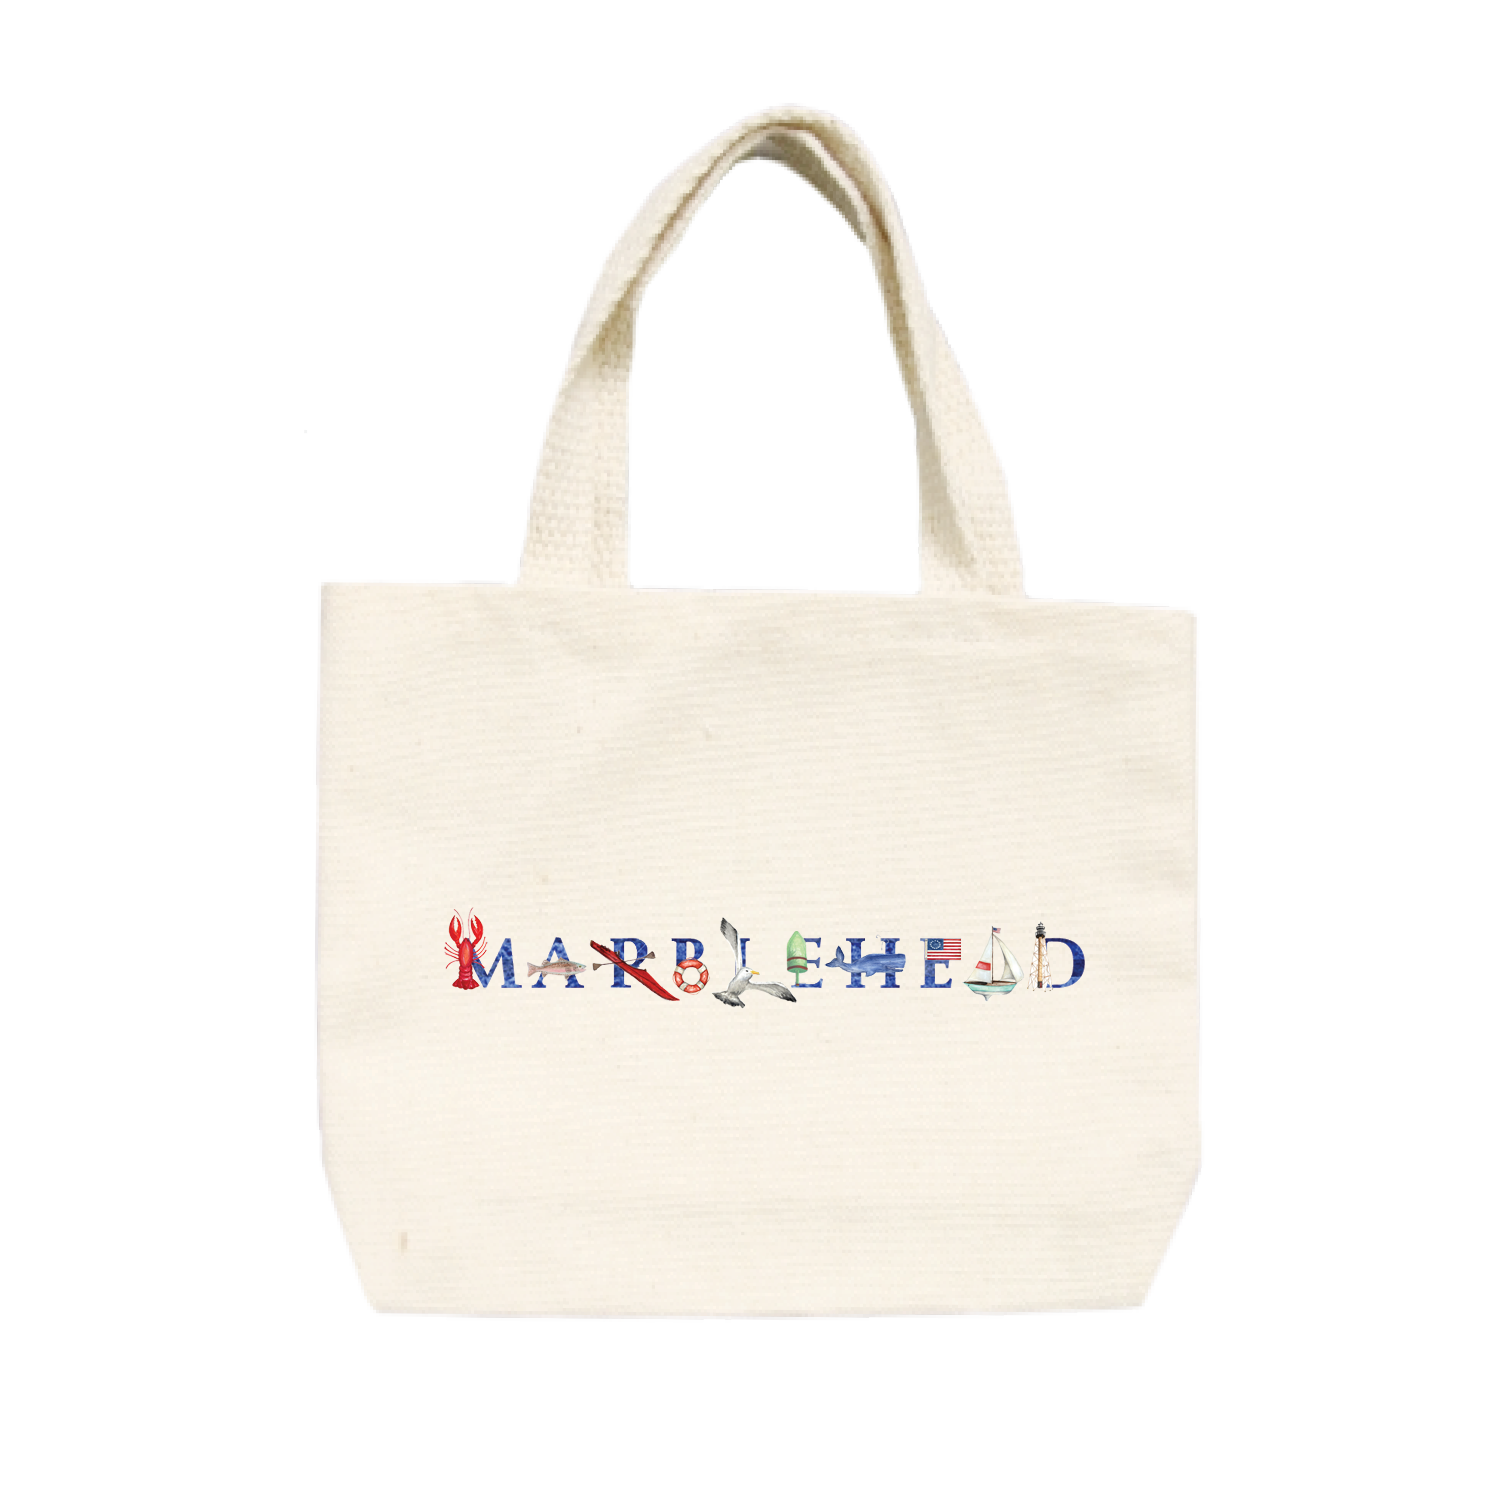 Marblehead small tote